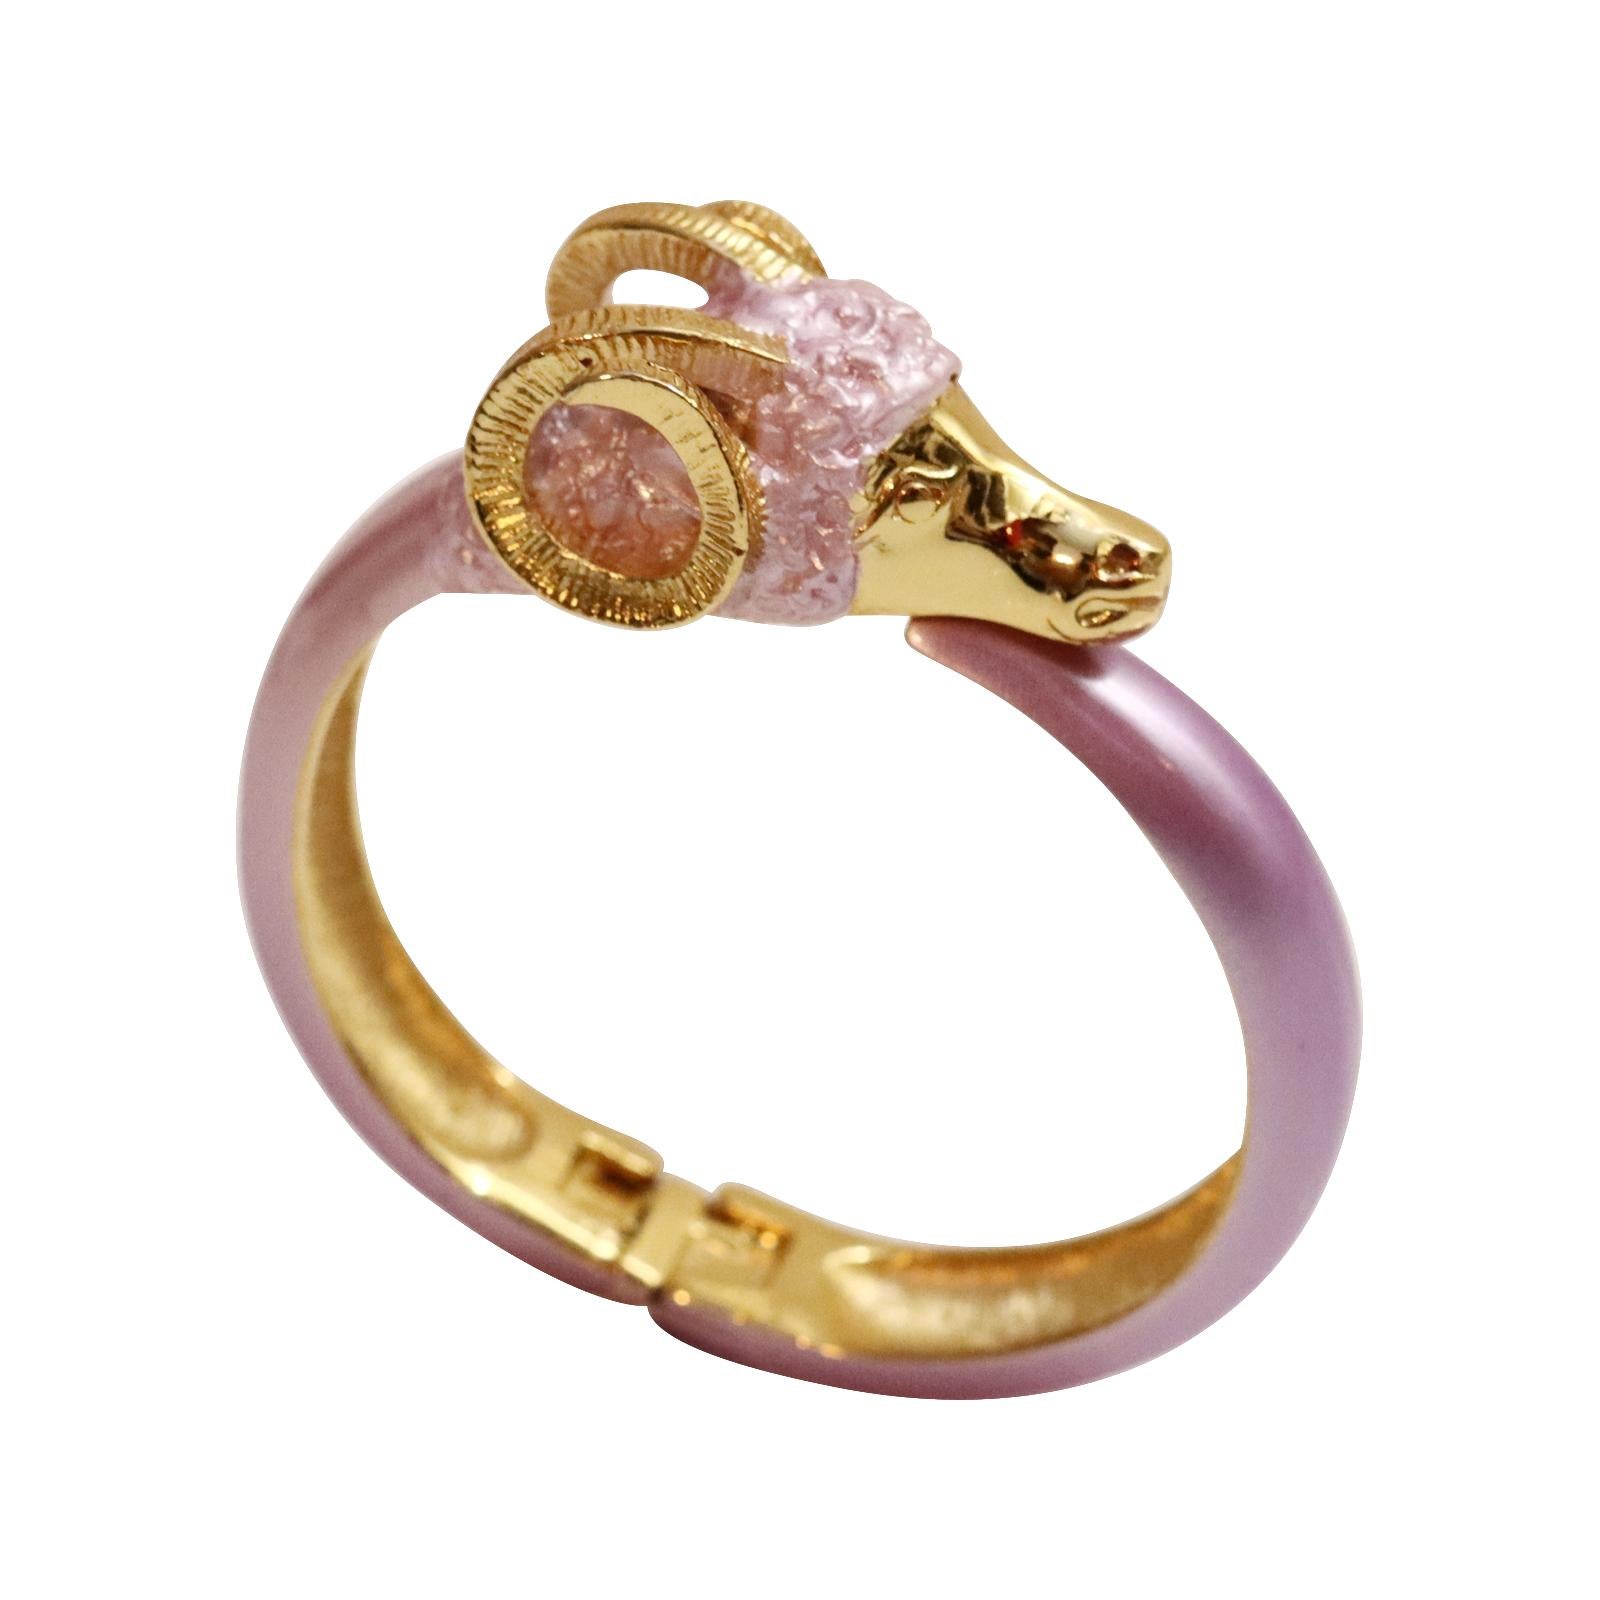 Modern Vintage Carolee Gold Tone and Pink Rams Head Bracelet, Circa 1980s For Sale